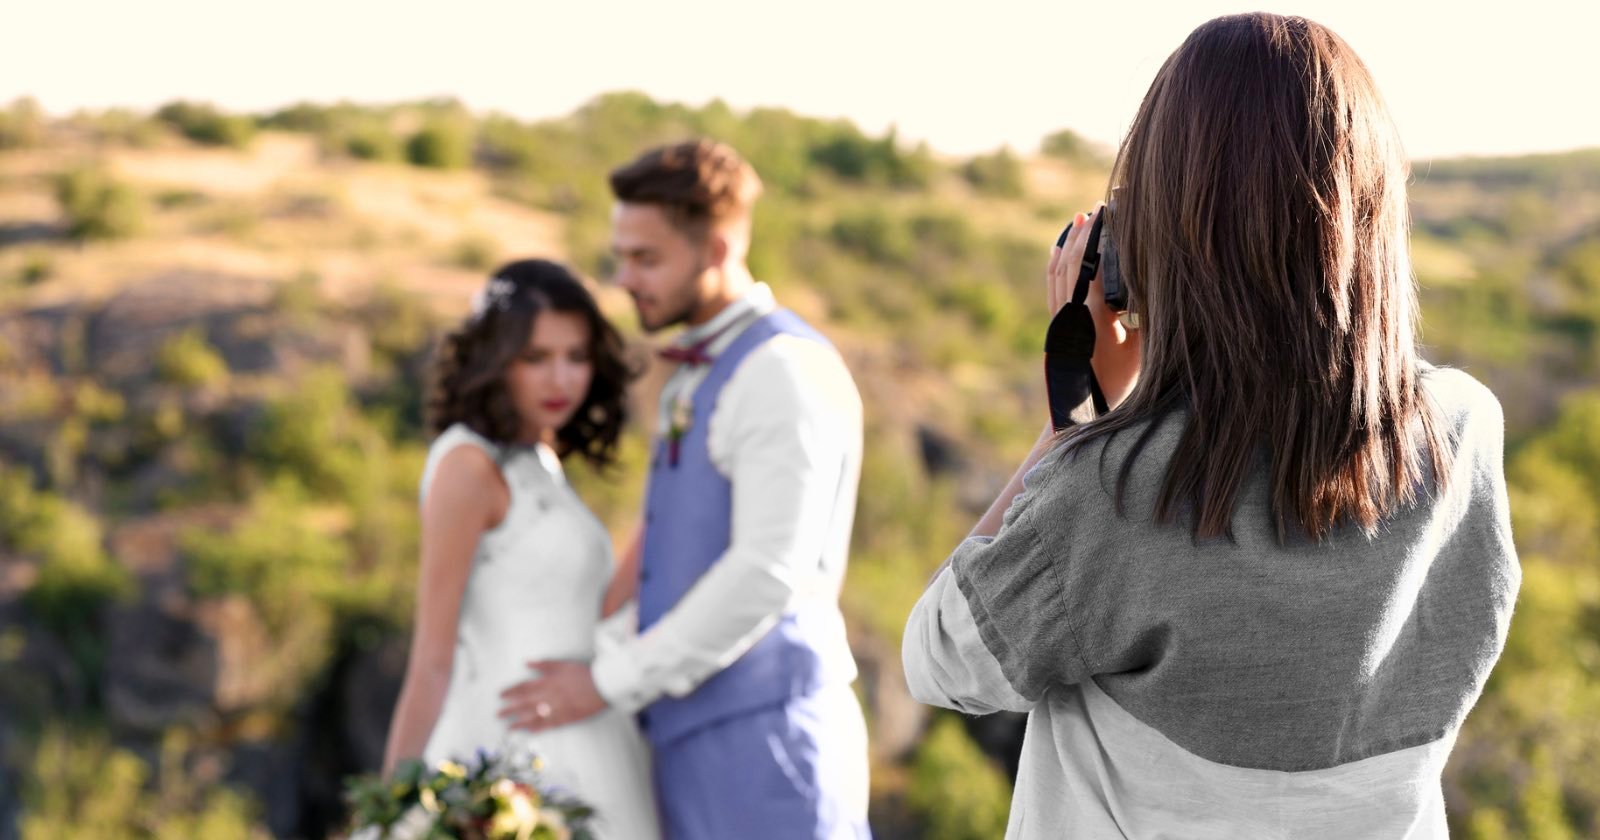  wedding photographer pleads guilty felony theft after scamming 